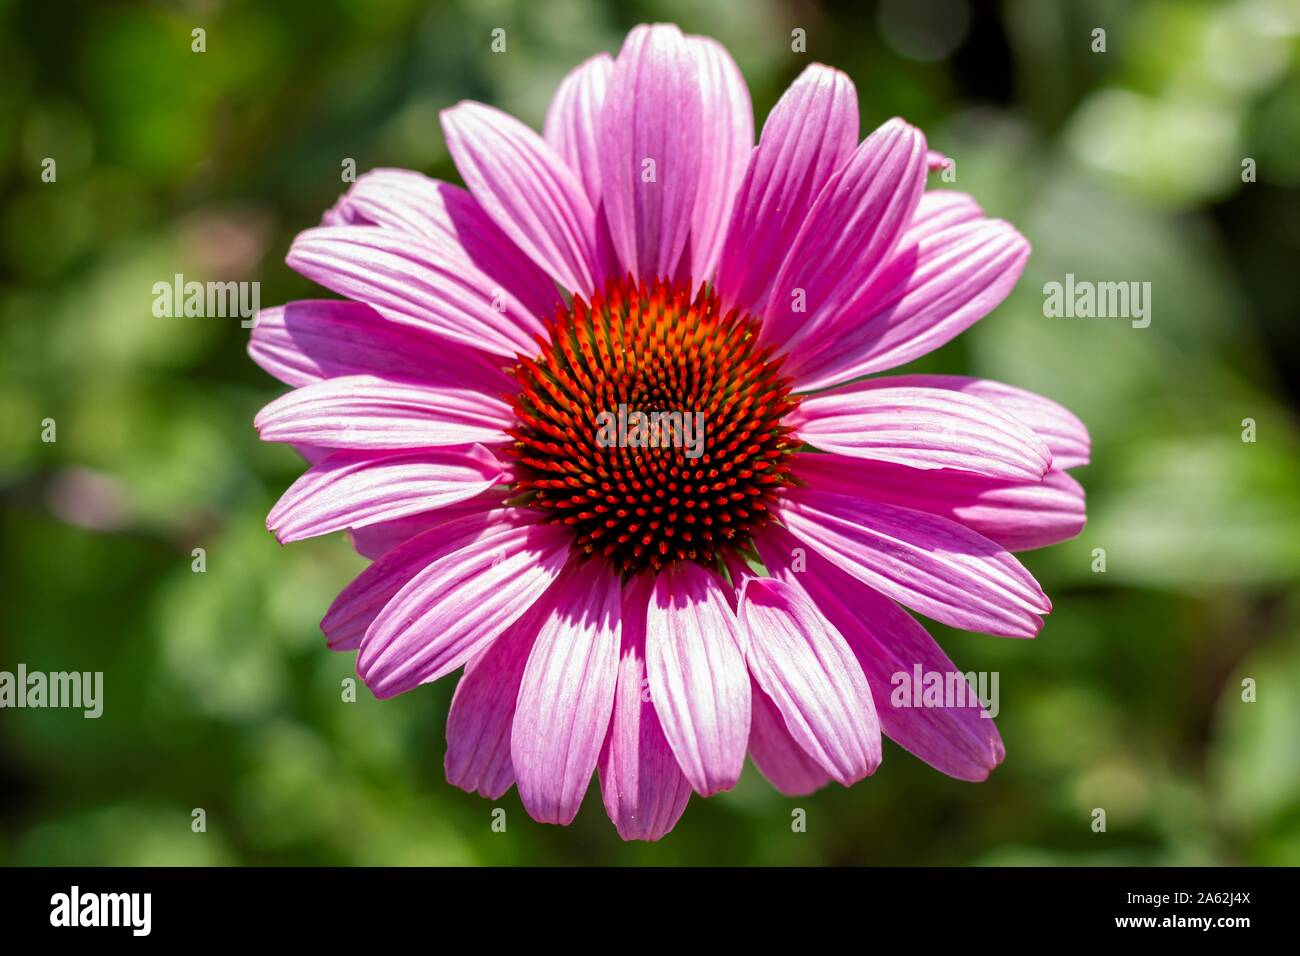 A top down portrait of a purple echinacea purpurea magnus superior. All details of the purple coneflower are visible. Stock Photo